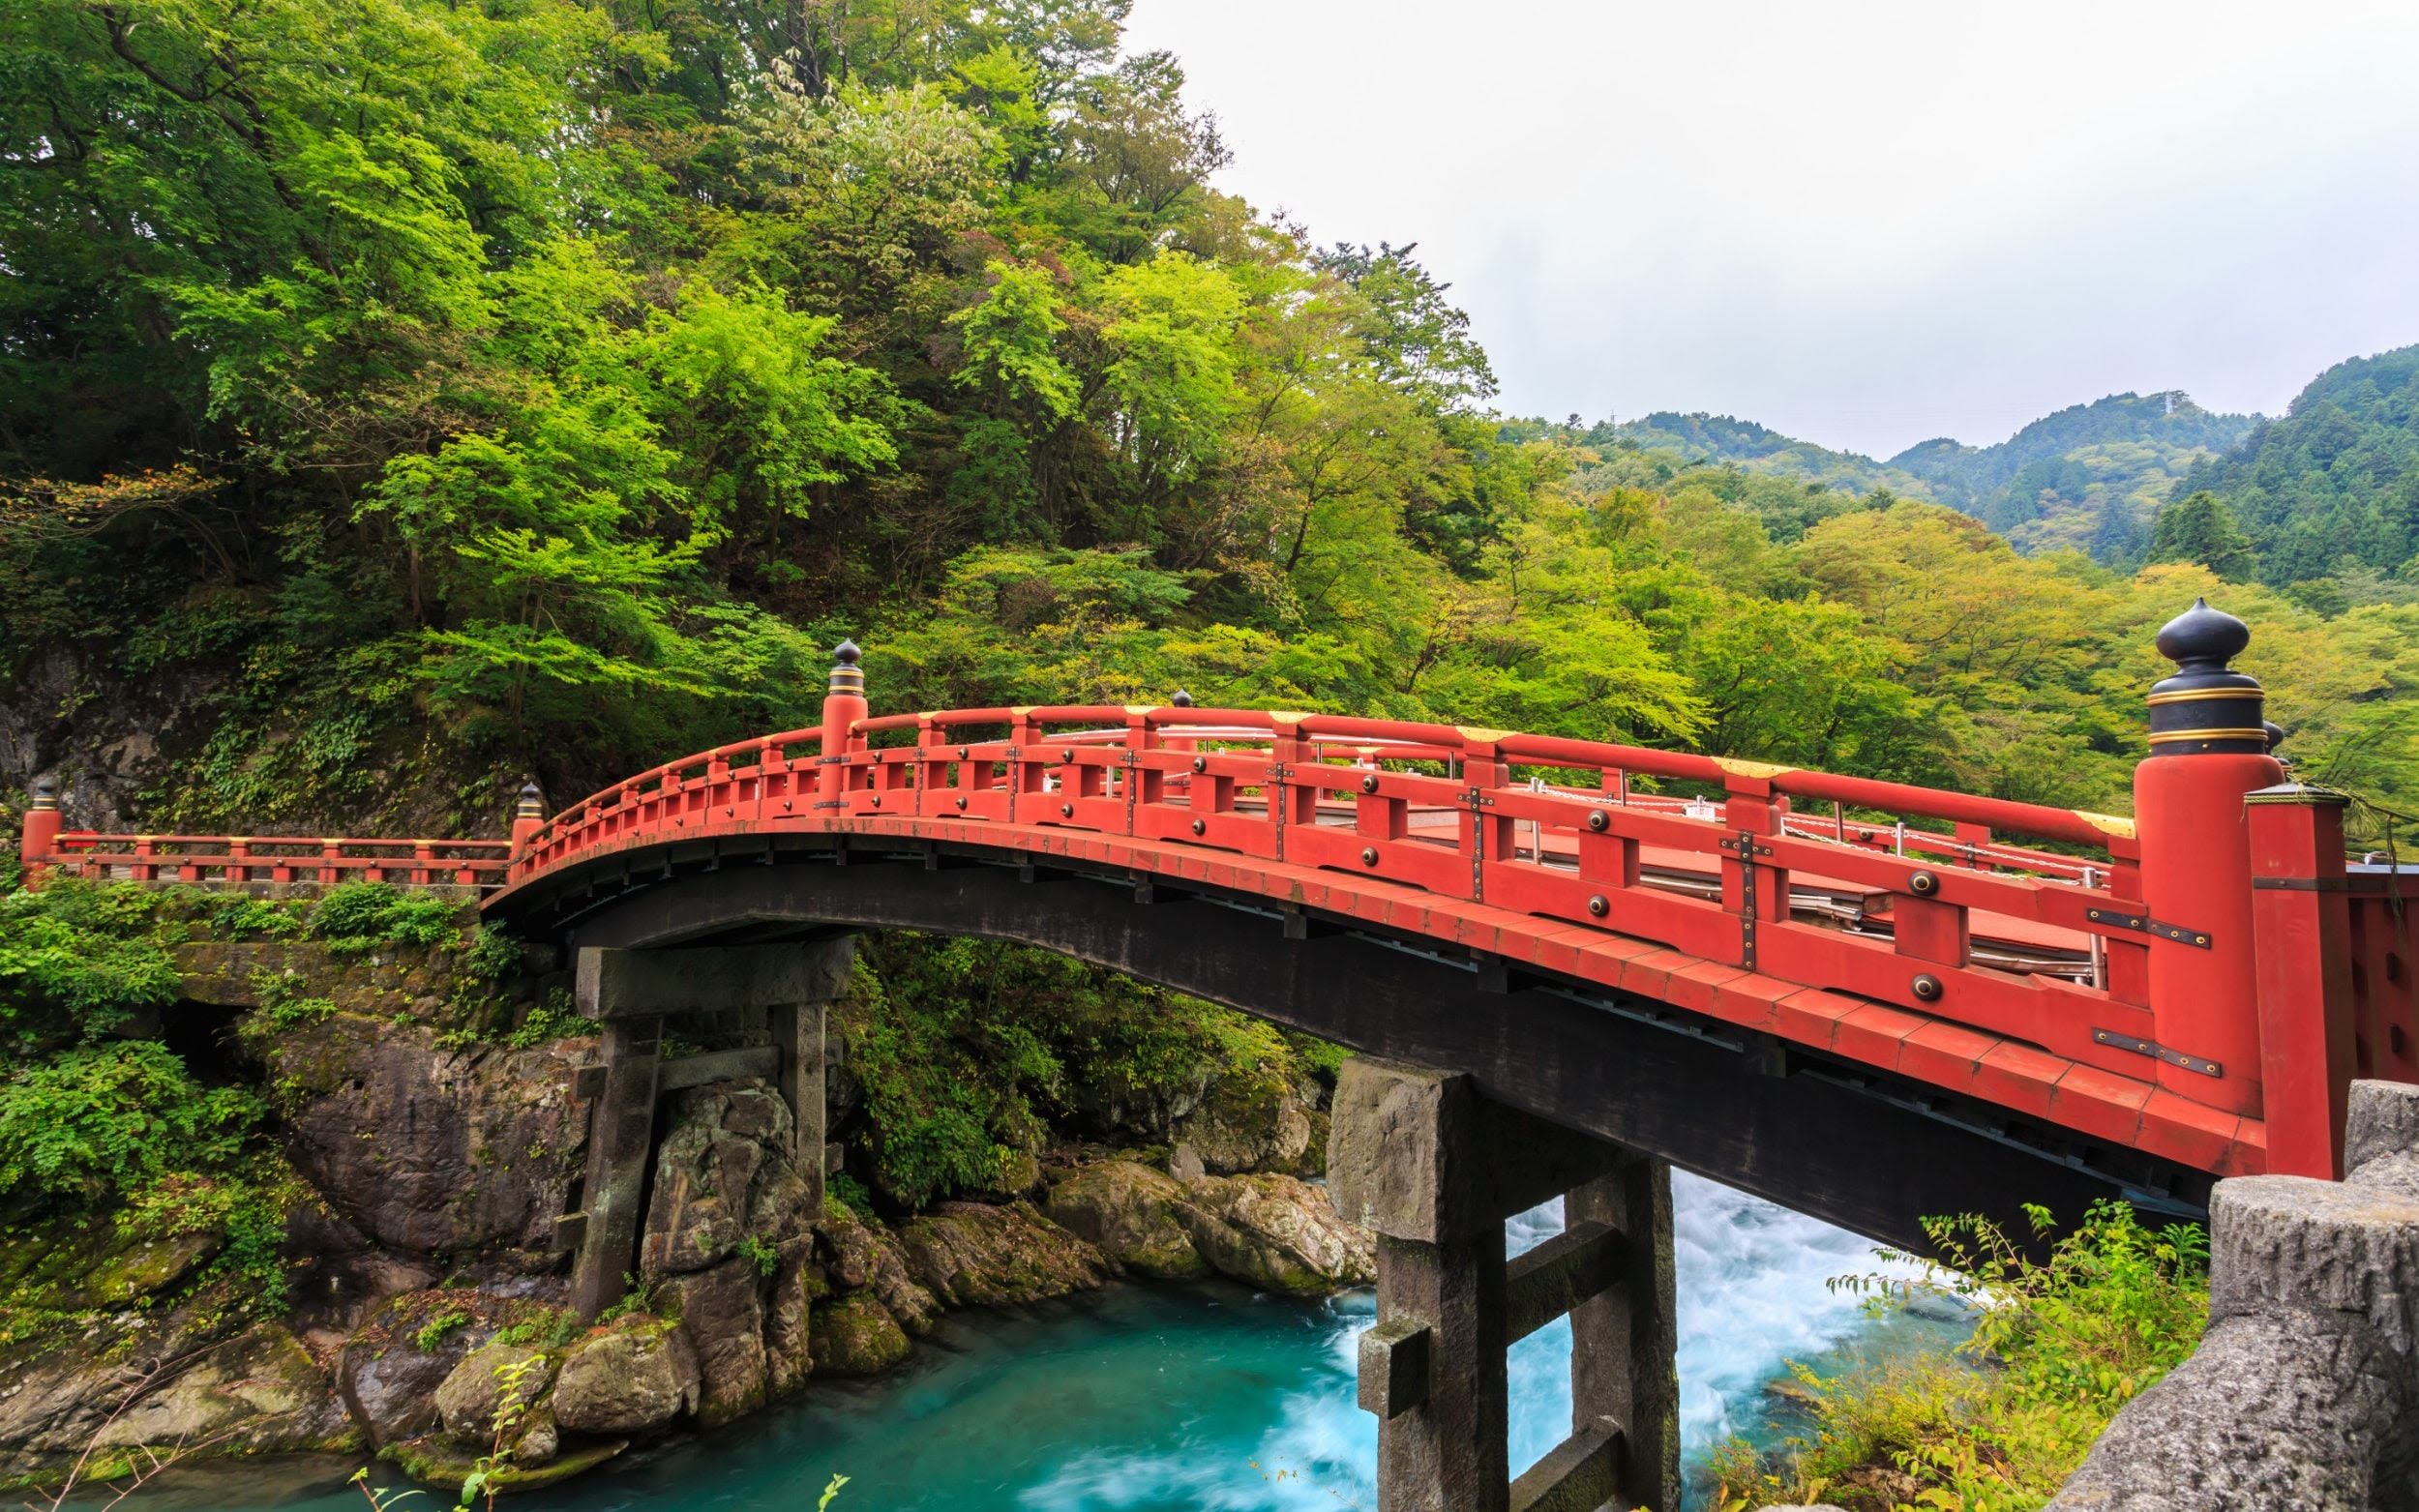 The glorious Japanese region just two hours from Tokyo – but lacking tourists